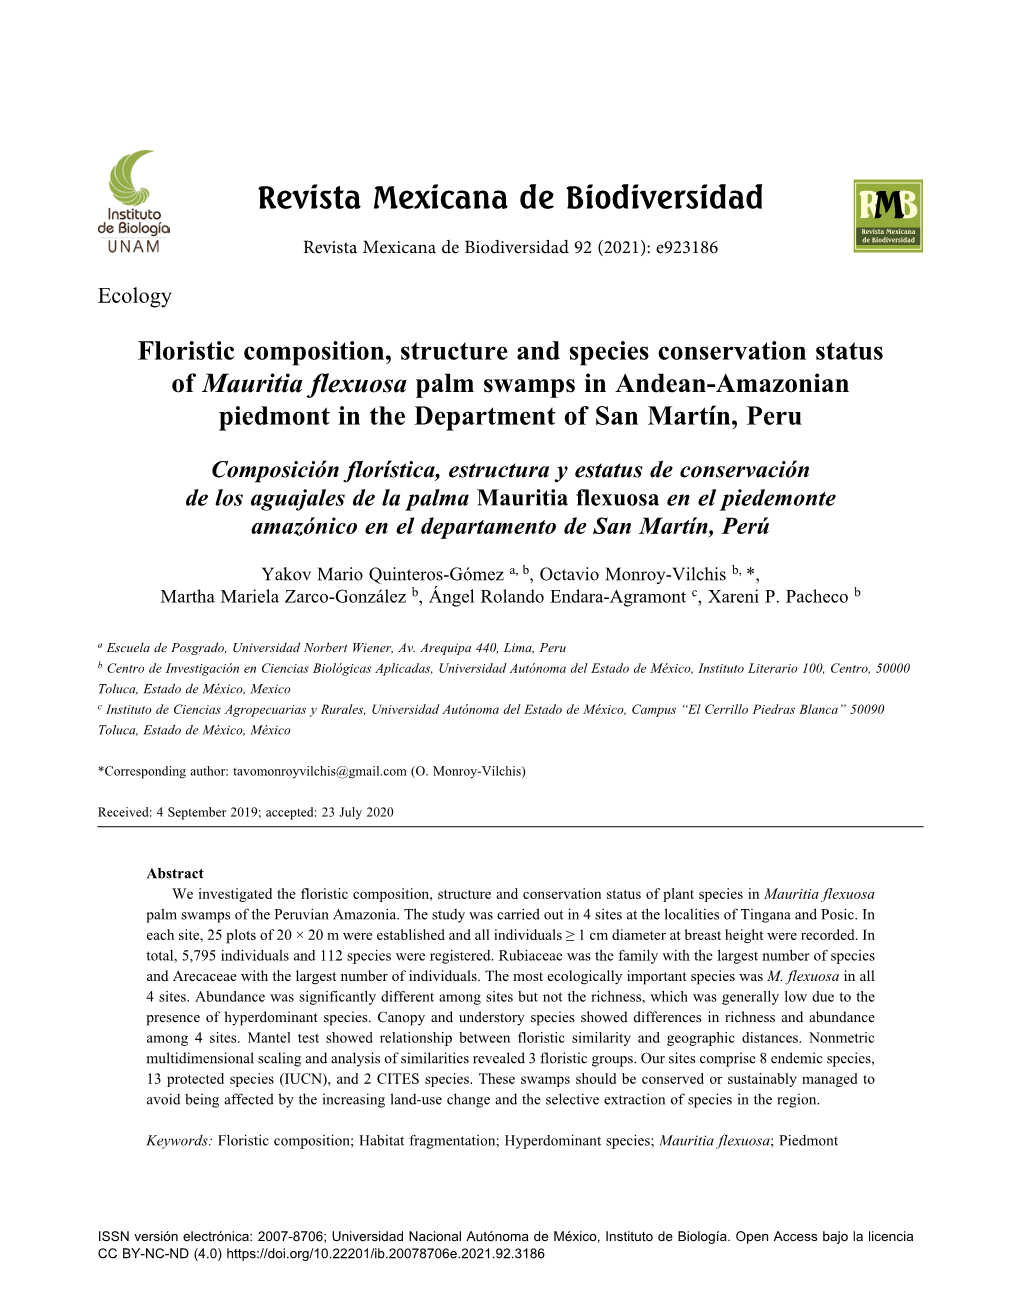 Floristic Composition, Structure and Species Conservation Status of Mauritia Flexuosa Palm Swamps in Andean-Amazonian Piedmont in the Department of San Martín, Peru